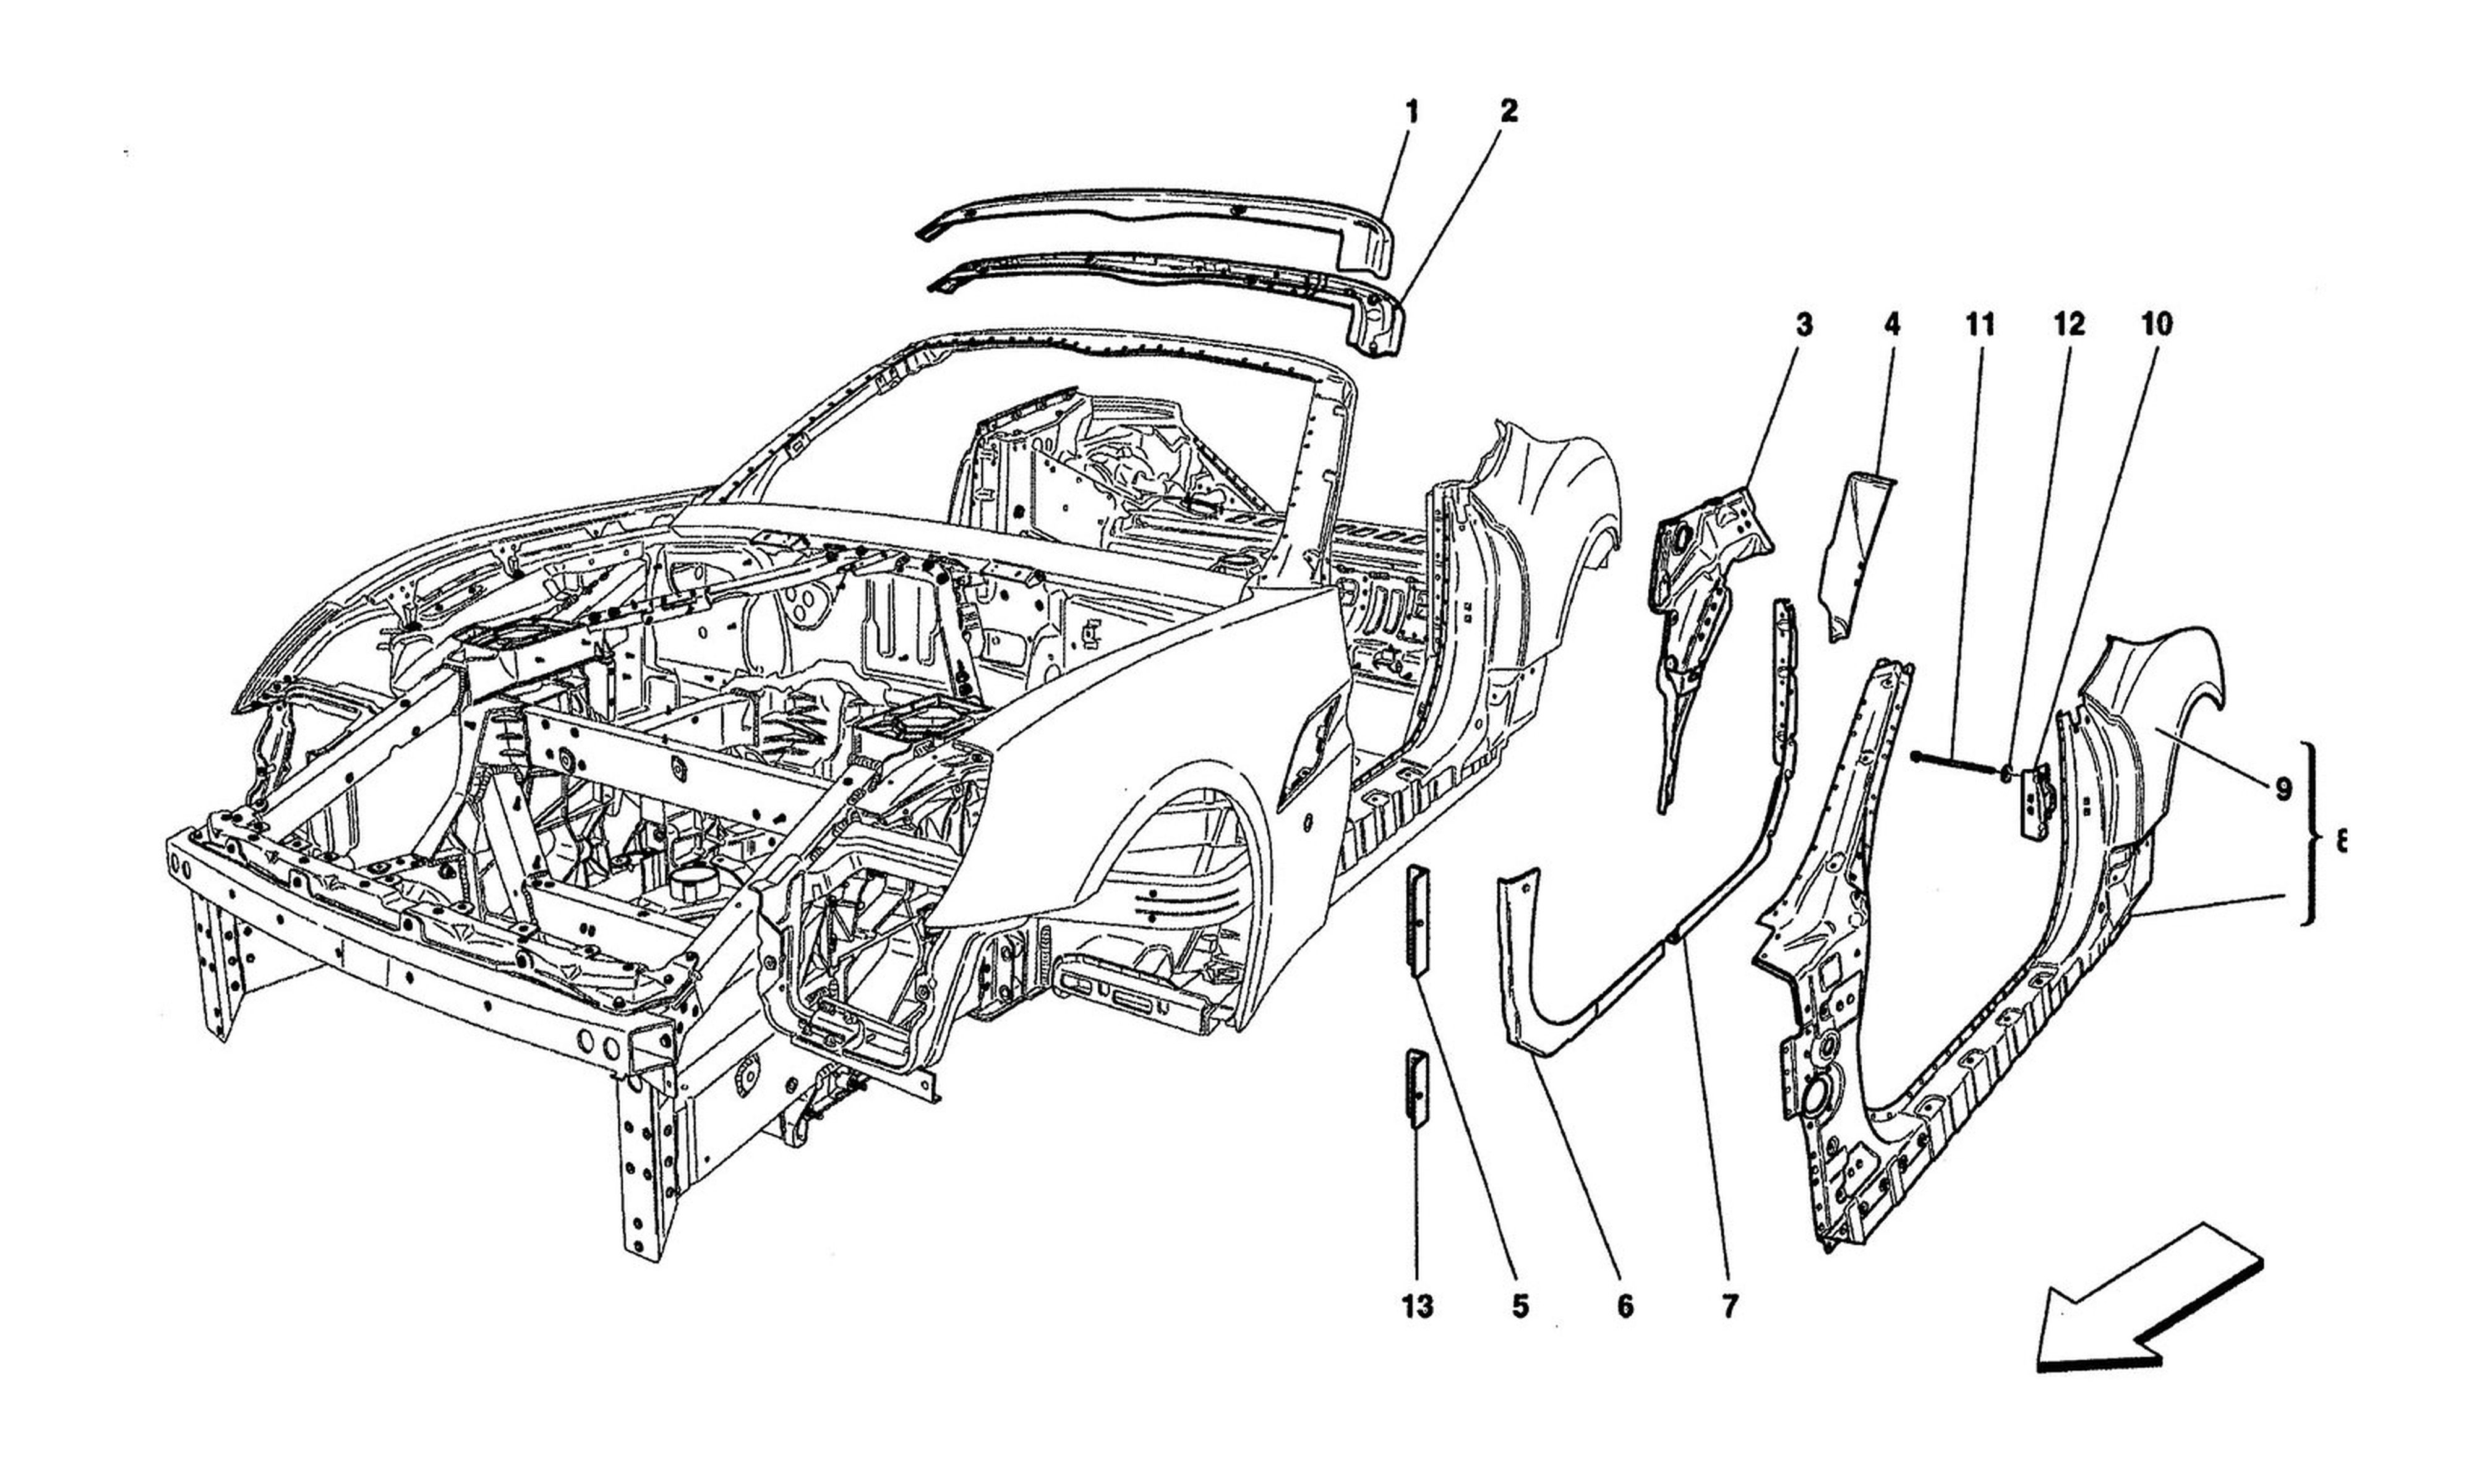 Schematic: Bodywork And Central Outer Trim Panels